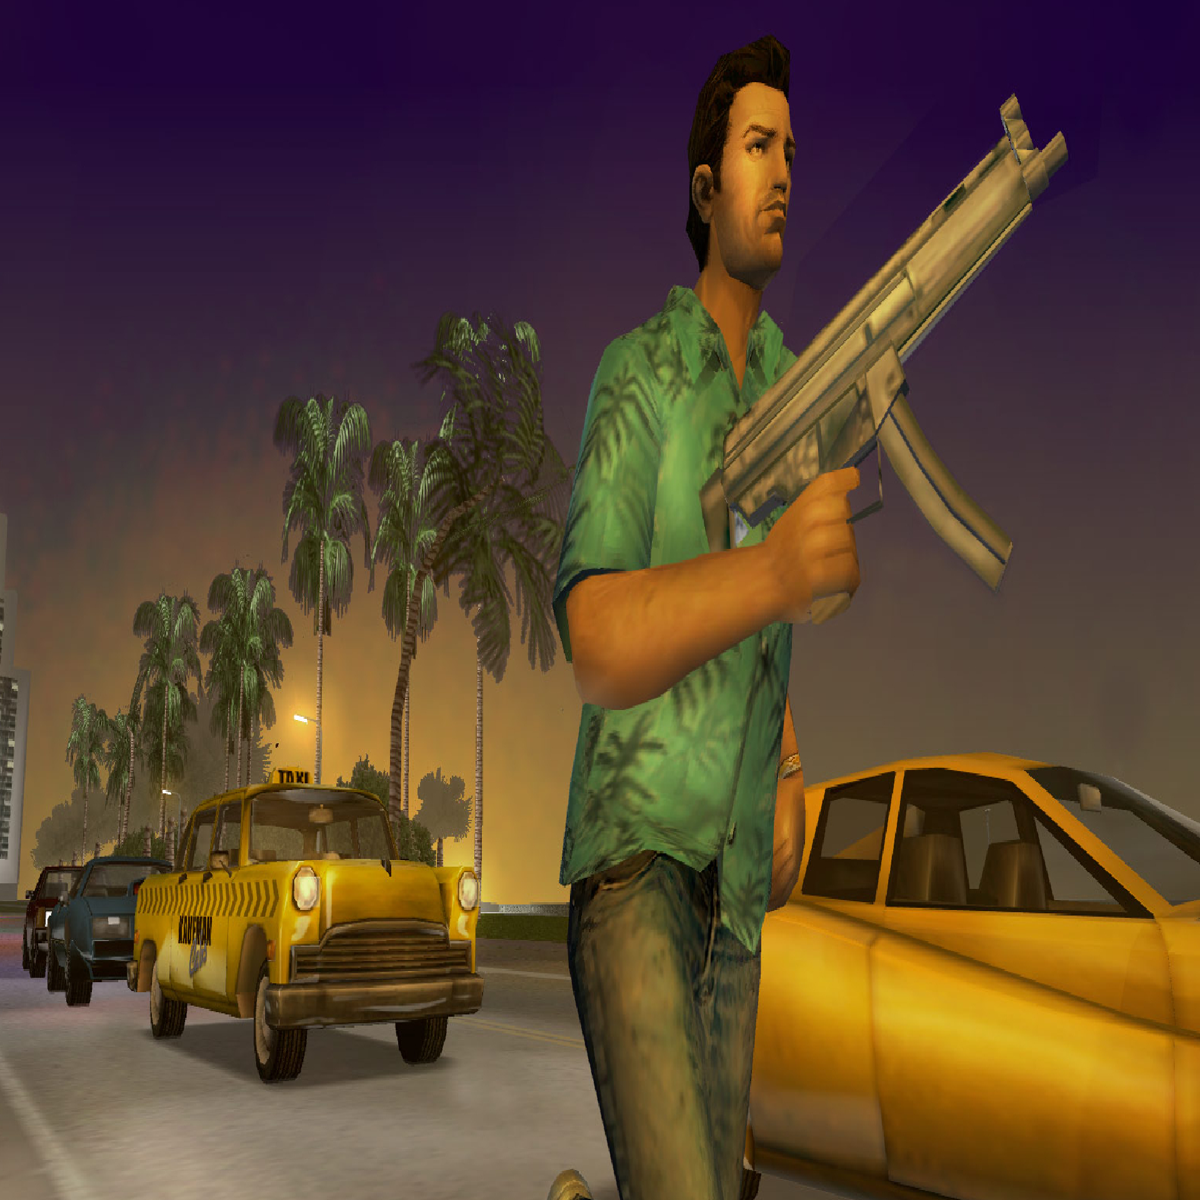 GTA: Vice City almost got turned into a Scottish zombie survival